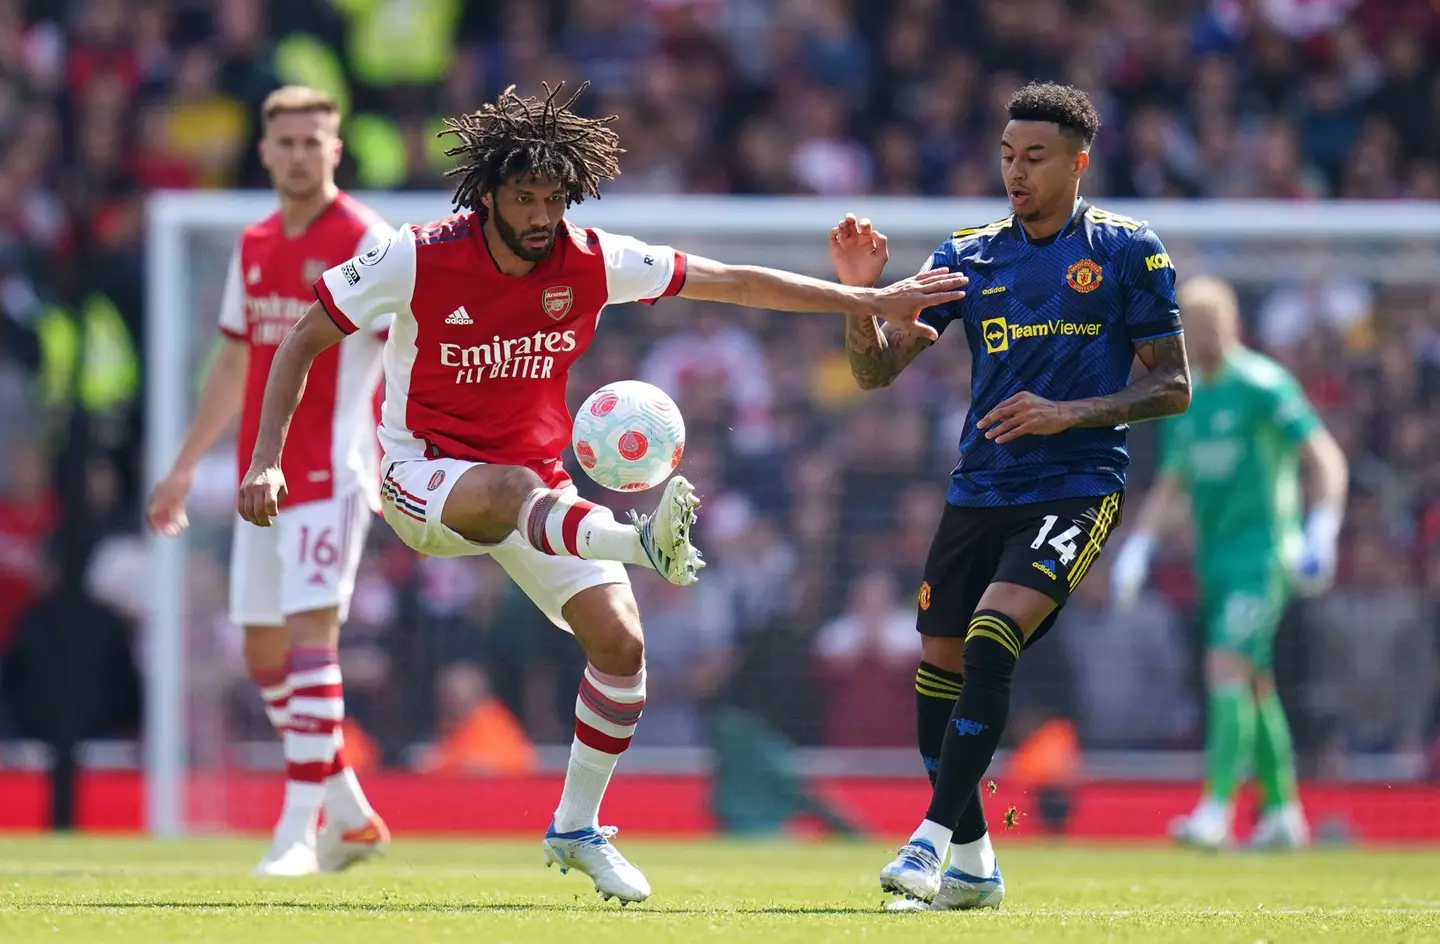 Lingard in action against Arsenal. (Image